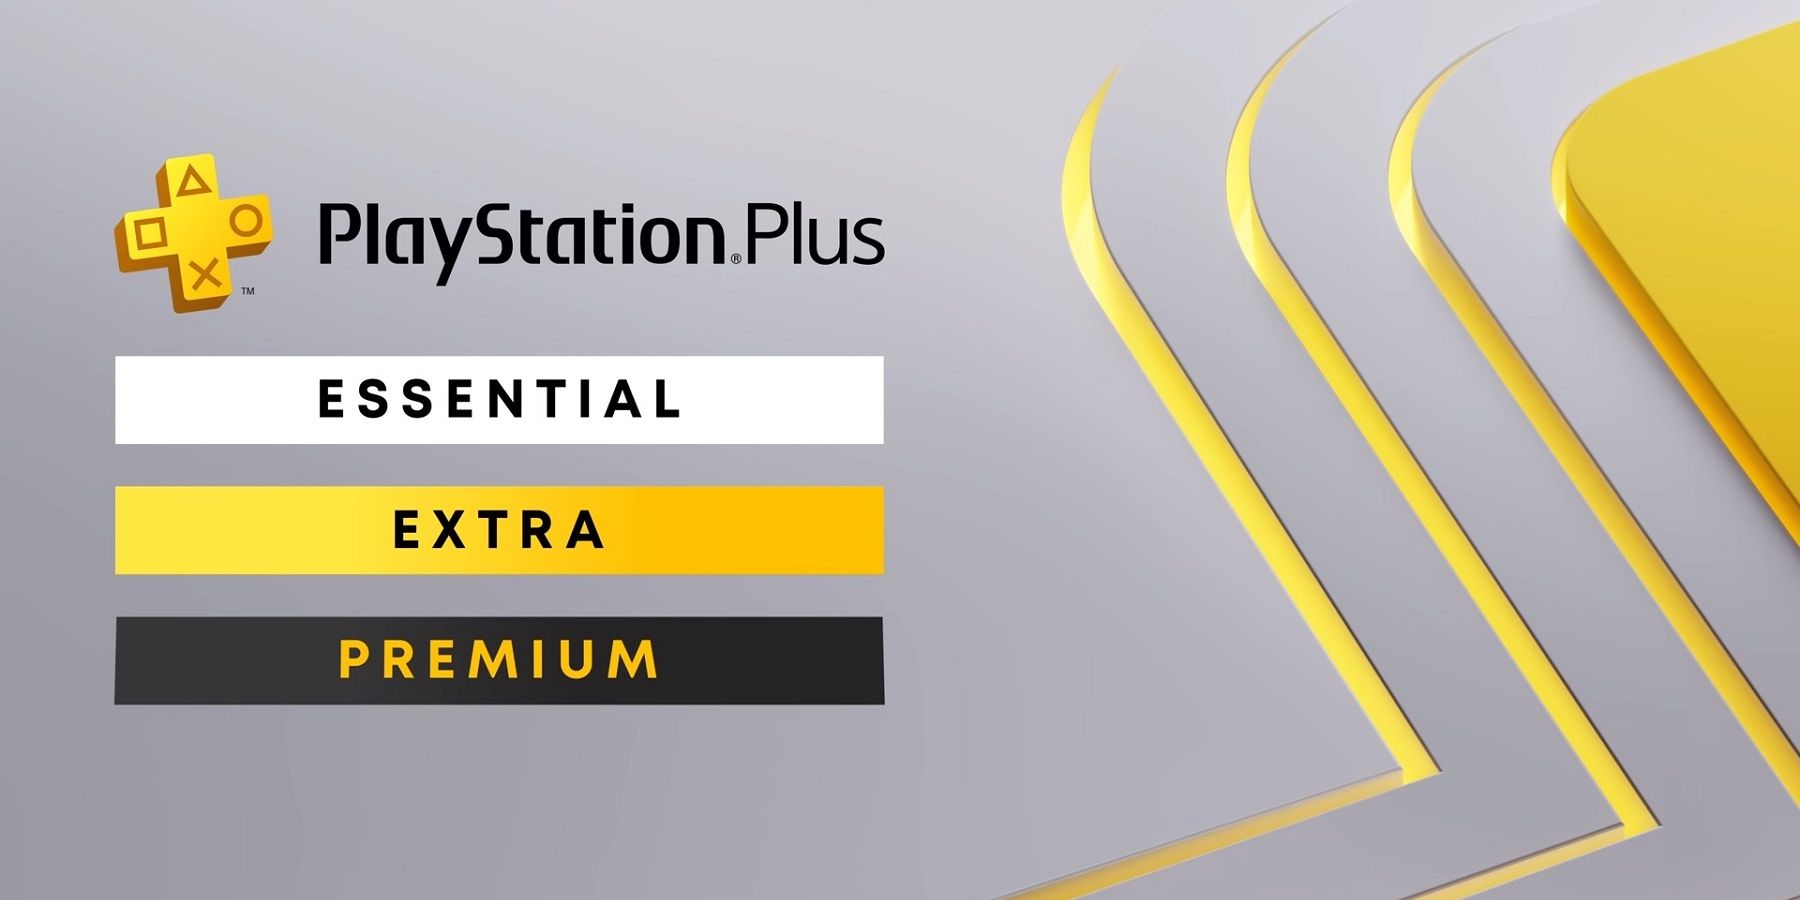 image compares playstation plus tiers